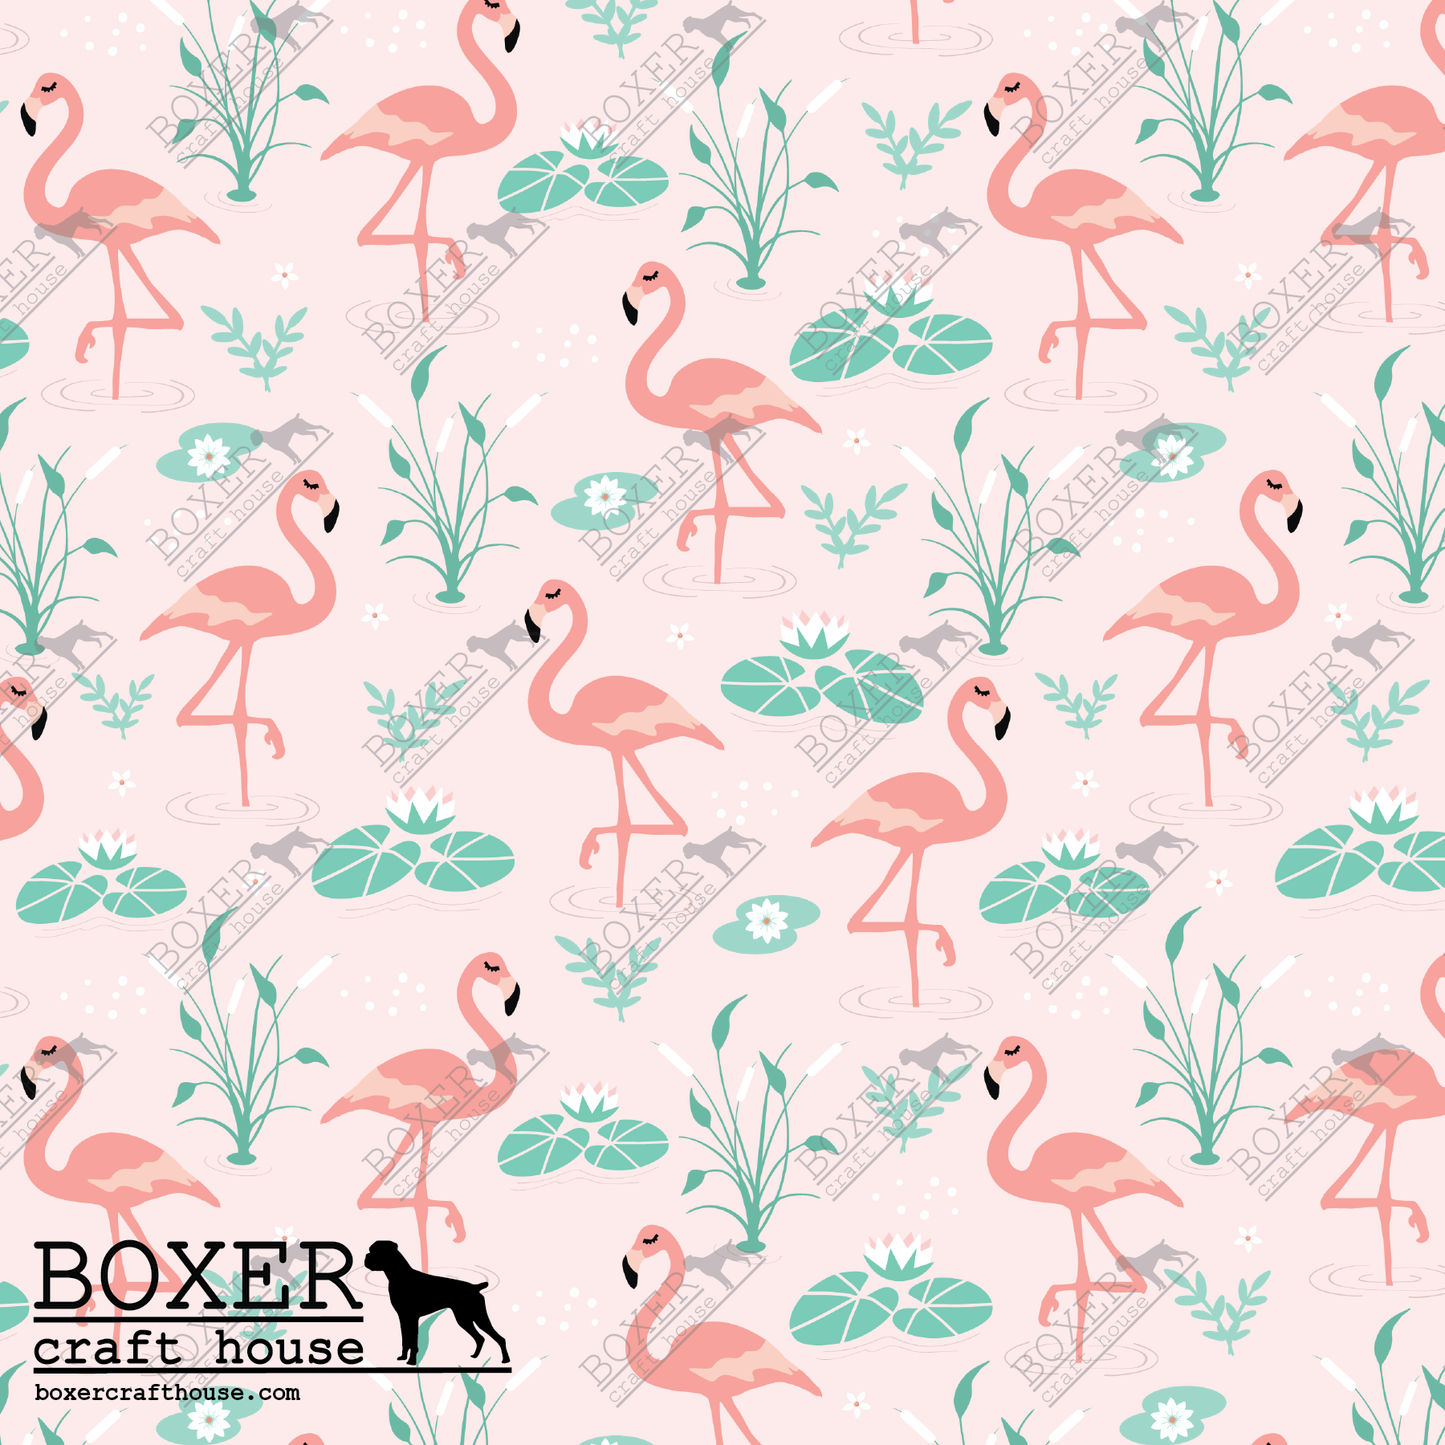 Flamingo Faux Leather, Embroidery Vinyl, Sewing Faux Leather, Bag Making Supplies, Faux Leather For Embroidery, Quality Faux Leather, Embroidery Supplies, Sewing Supplies, Woman Owned Business, Craft Supply Store, USA, In the Hoop Supplies, Sewing with vinyl,Specialty Vinyl, Printed in the USA Faux Leather, Flamingo Print, Flamingos, Flamingo Embroidery Vinyl, Flamingo Faux Leather,